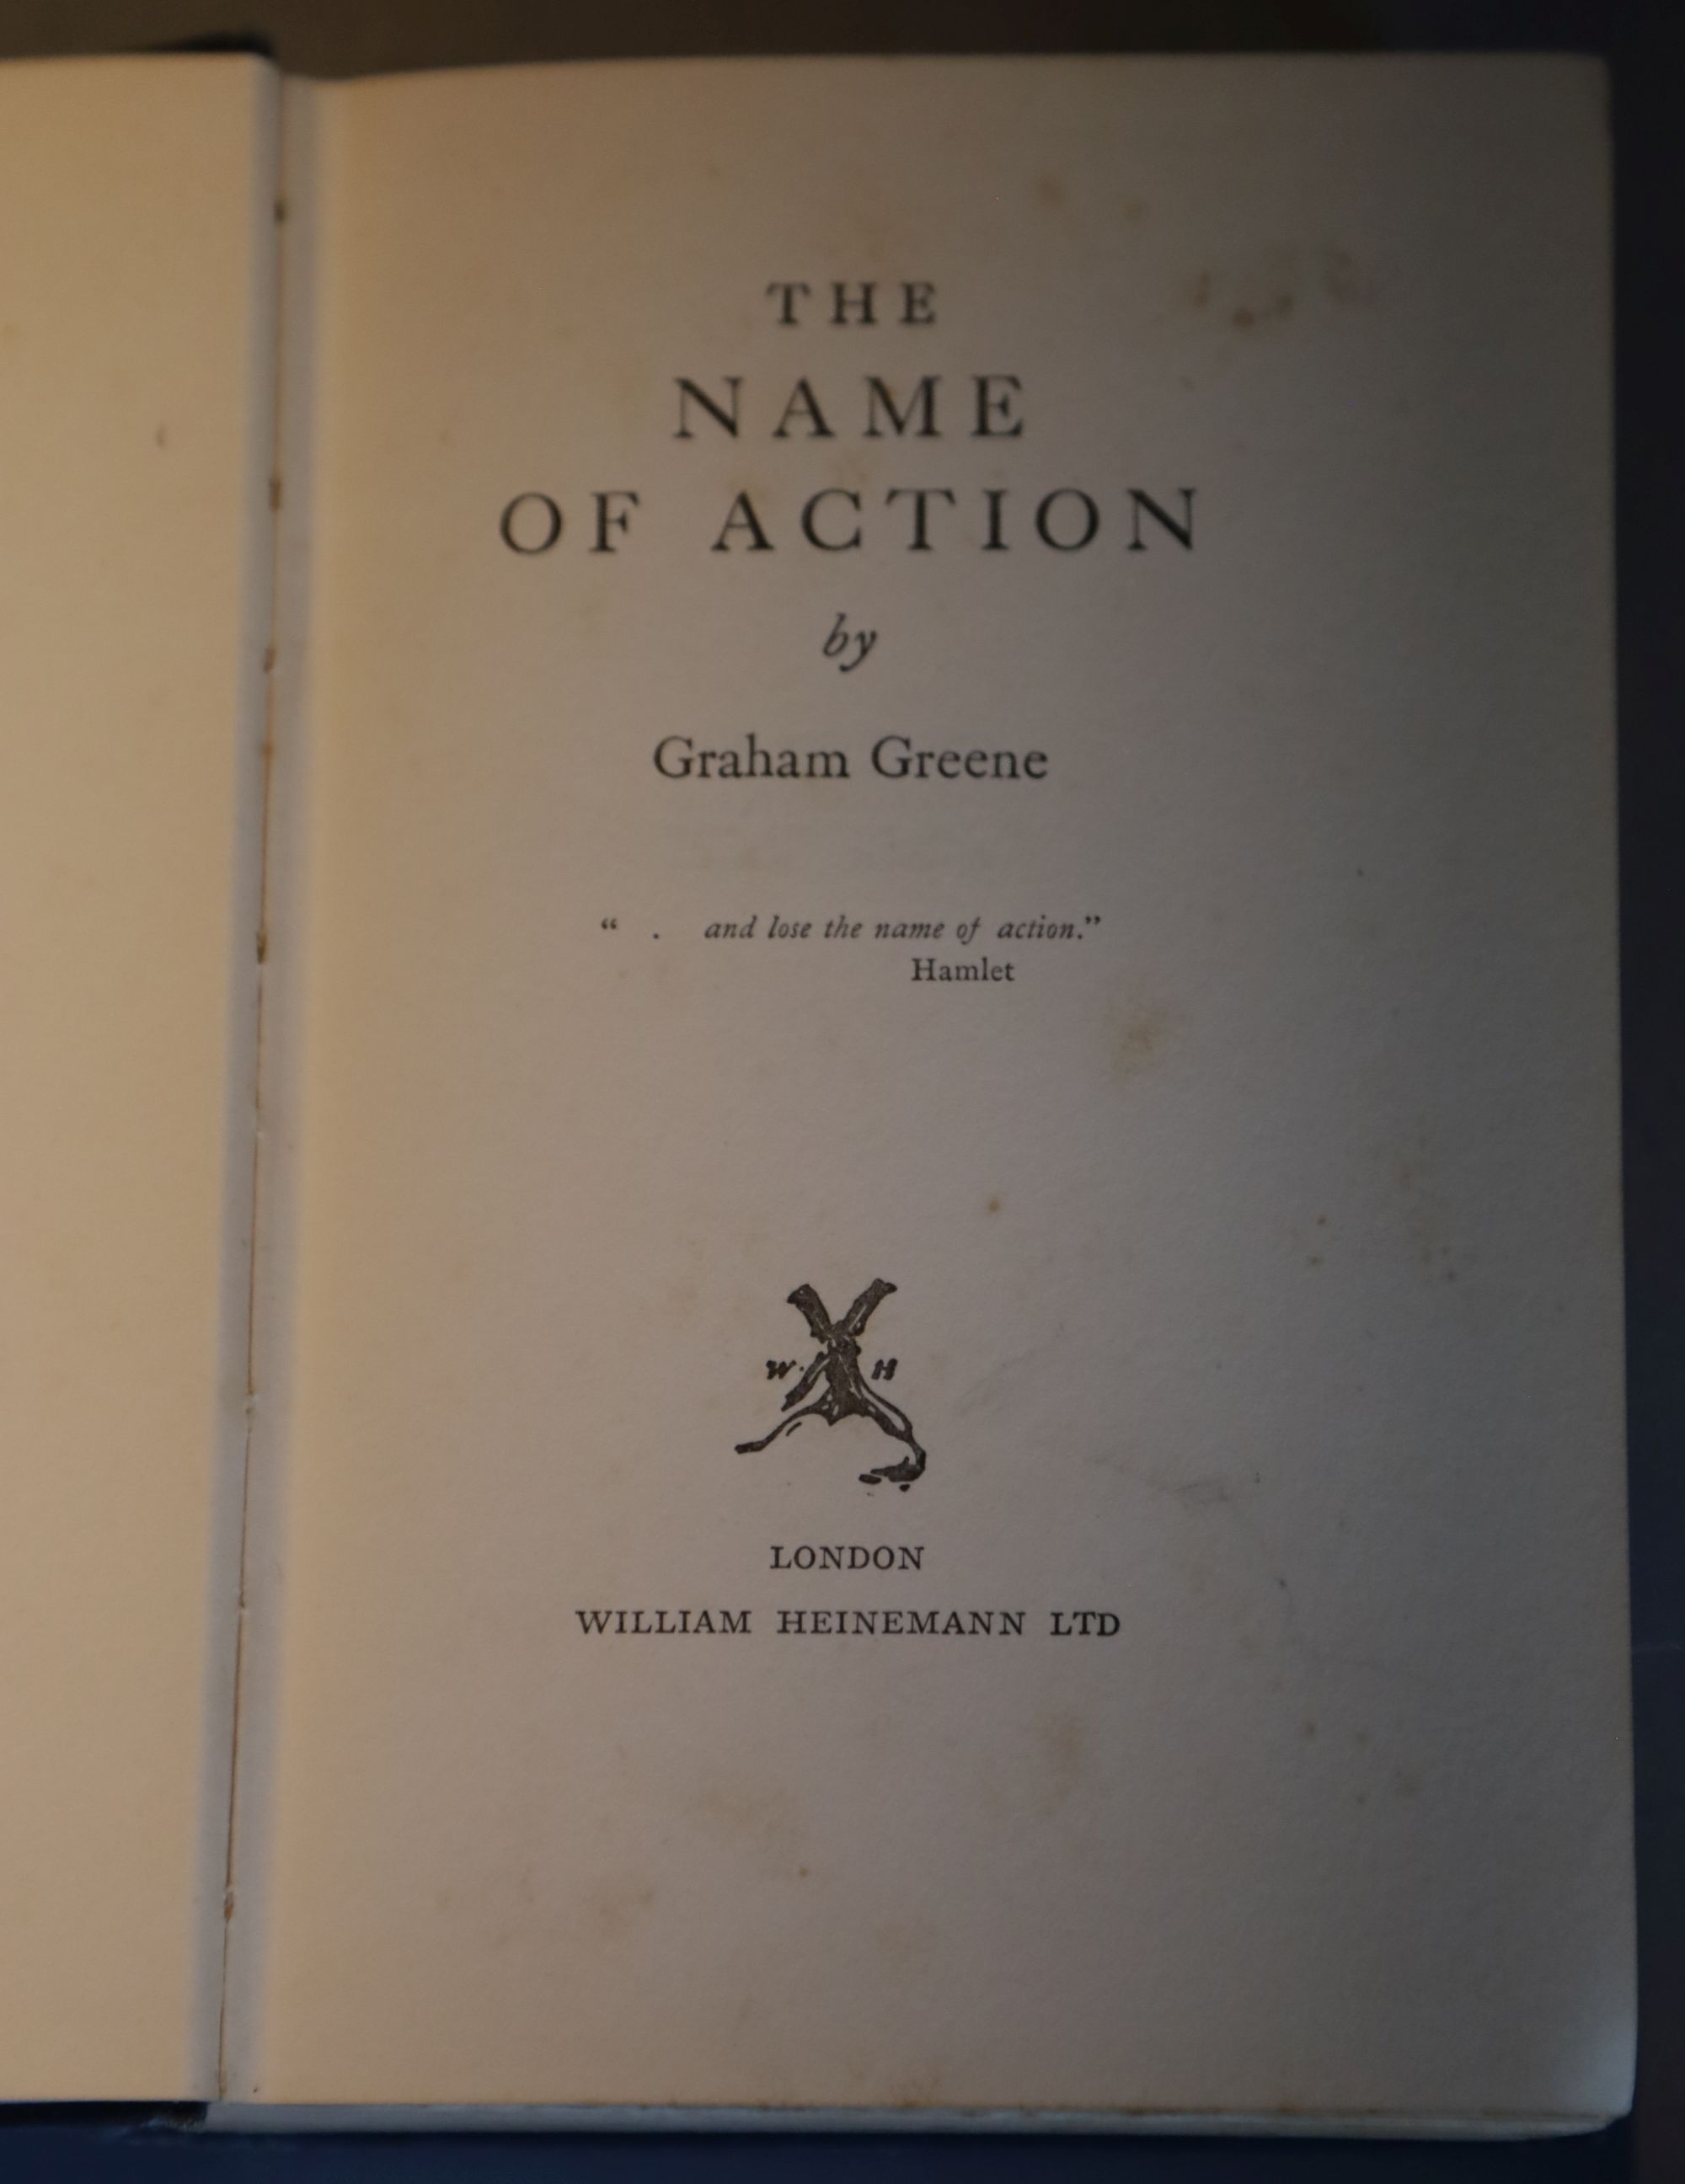 Greene, Graham - The Name of Action, 1st edition, half title, original cloth, 1930